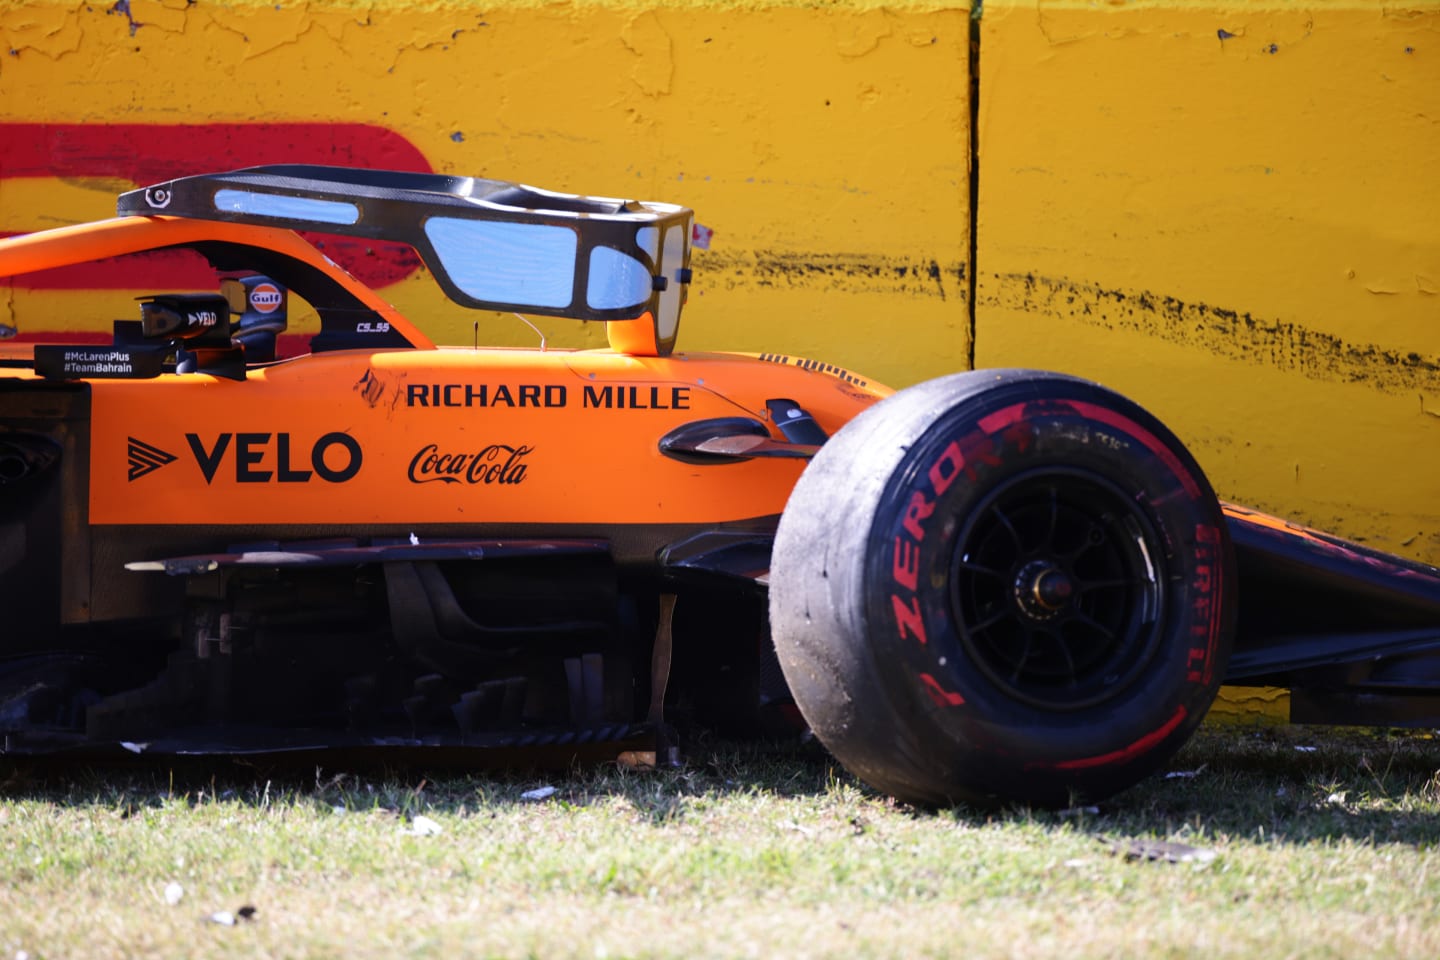 SCARPERIA, ITALY - SEPTEMBER 13: The broken car of Carlos Sainz of Spain driving the (55) McLaren F1 Team MCL35 Renault is seen at the side of the track during the F1 Grand Prix of Tuscany at Mugello Circuit on September 13, 2020 in Scarperia, Italy. (Photo by Peter Fox/Getty Images)